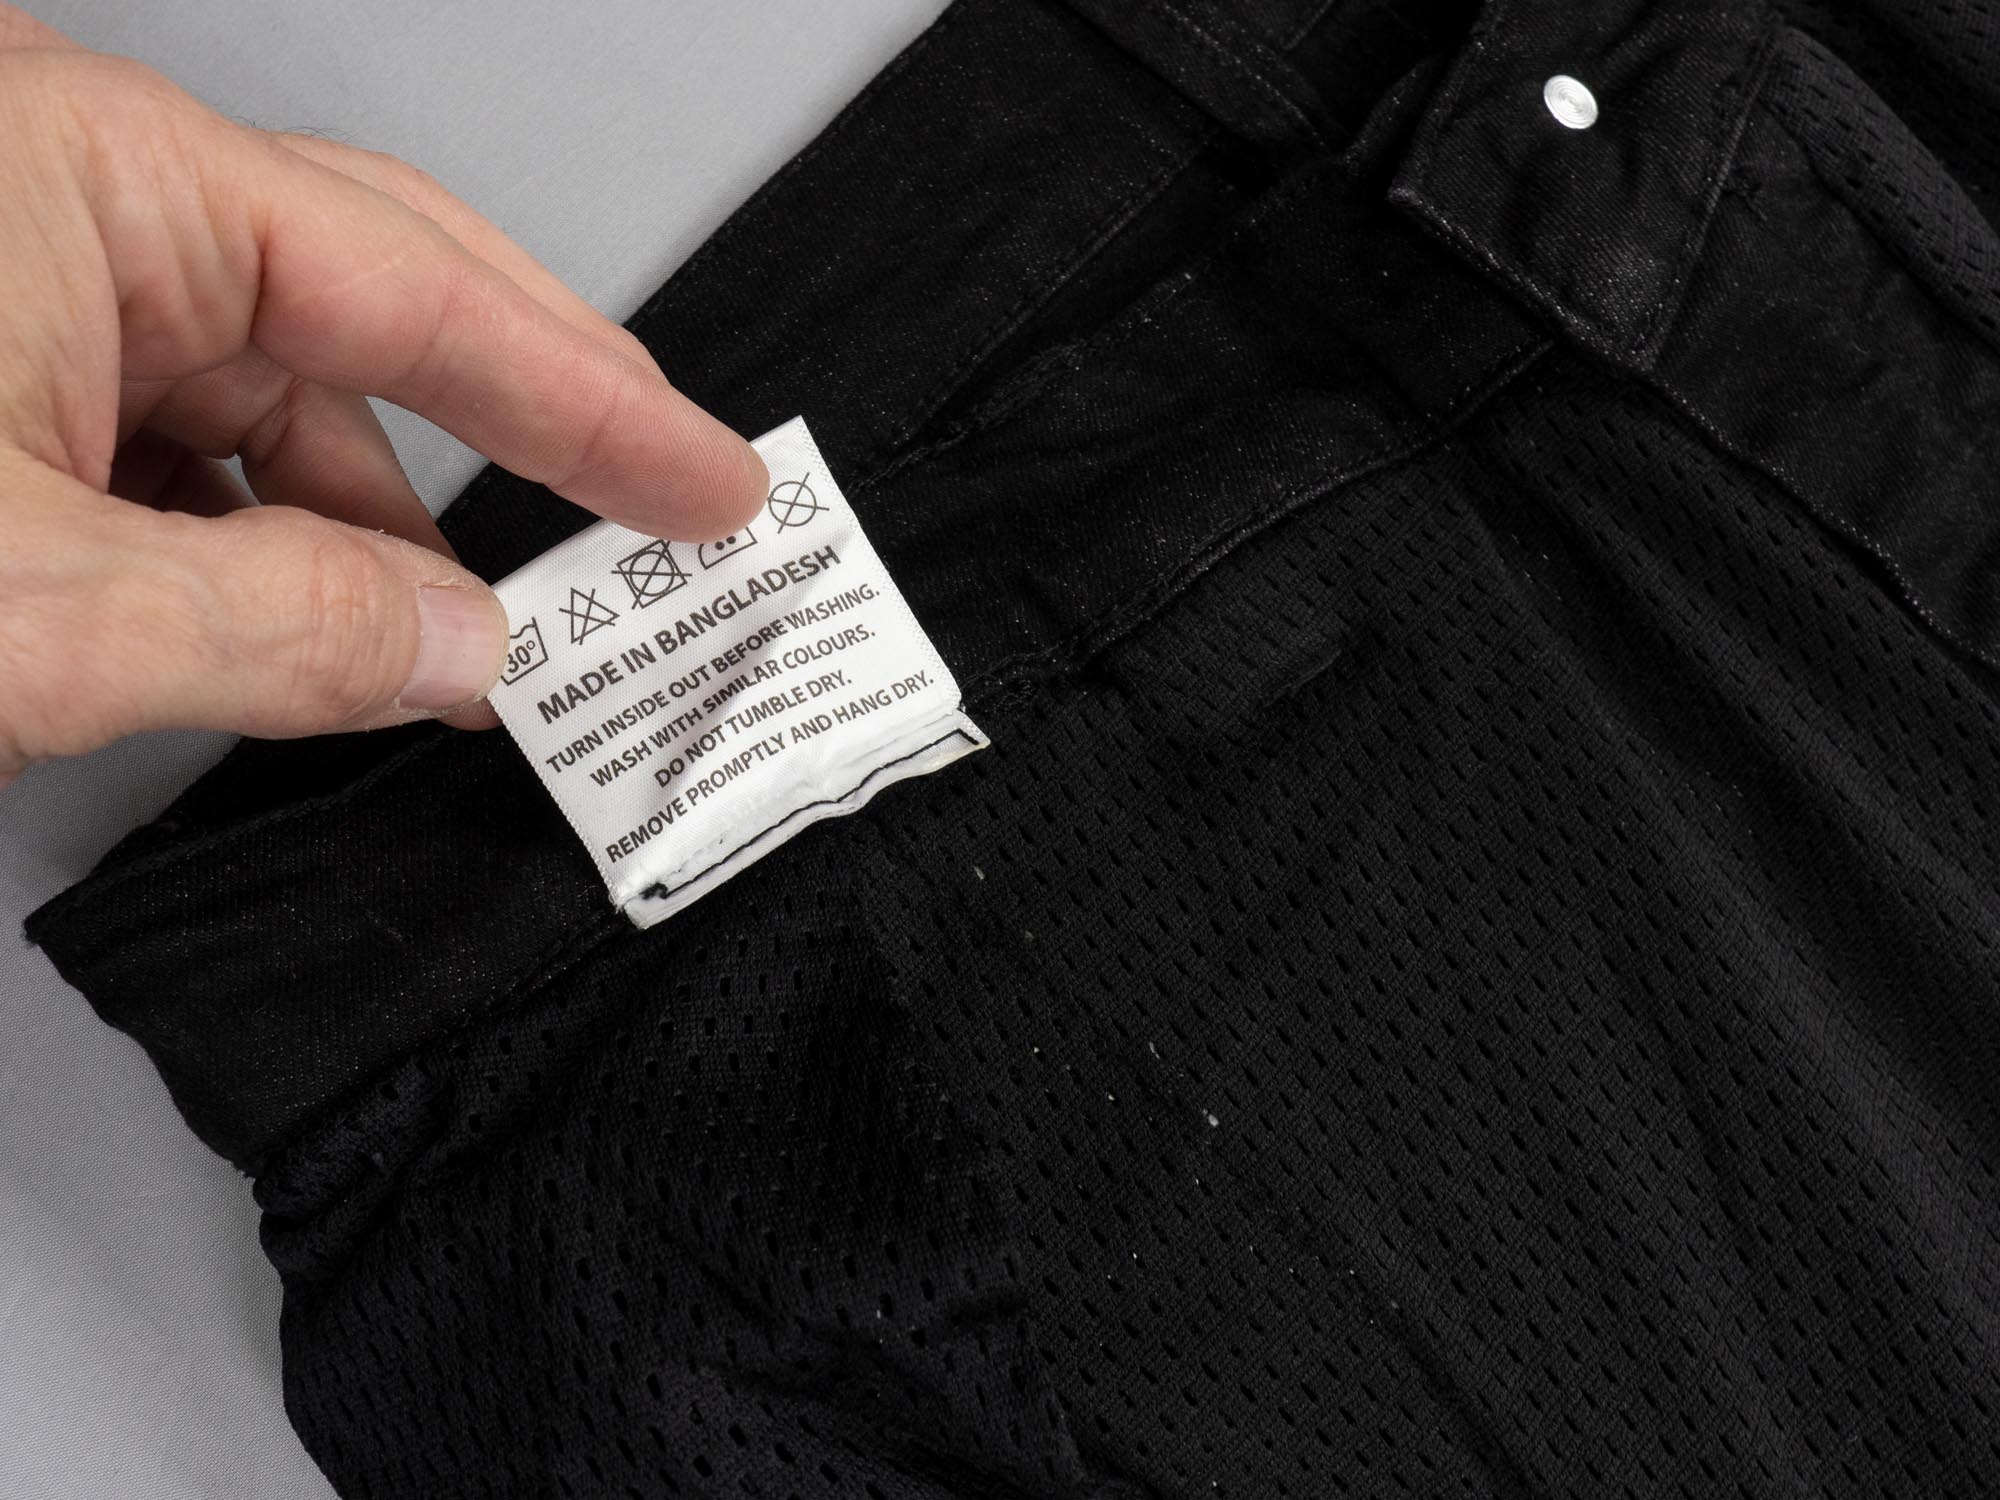 34 heritage jeans washing instructions